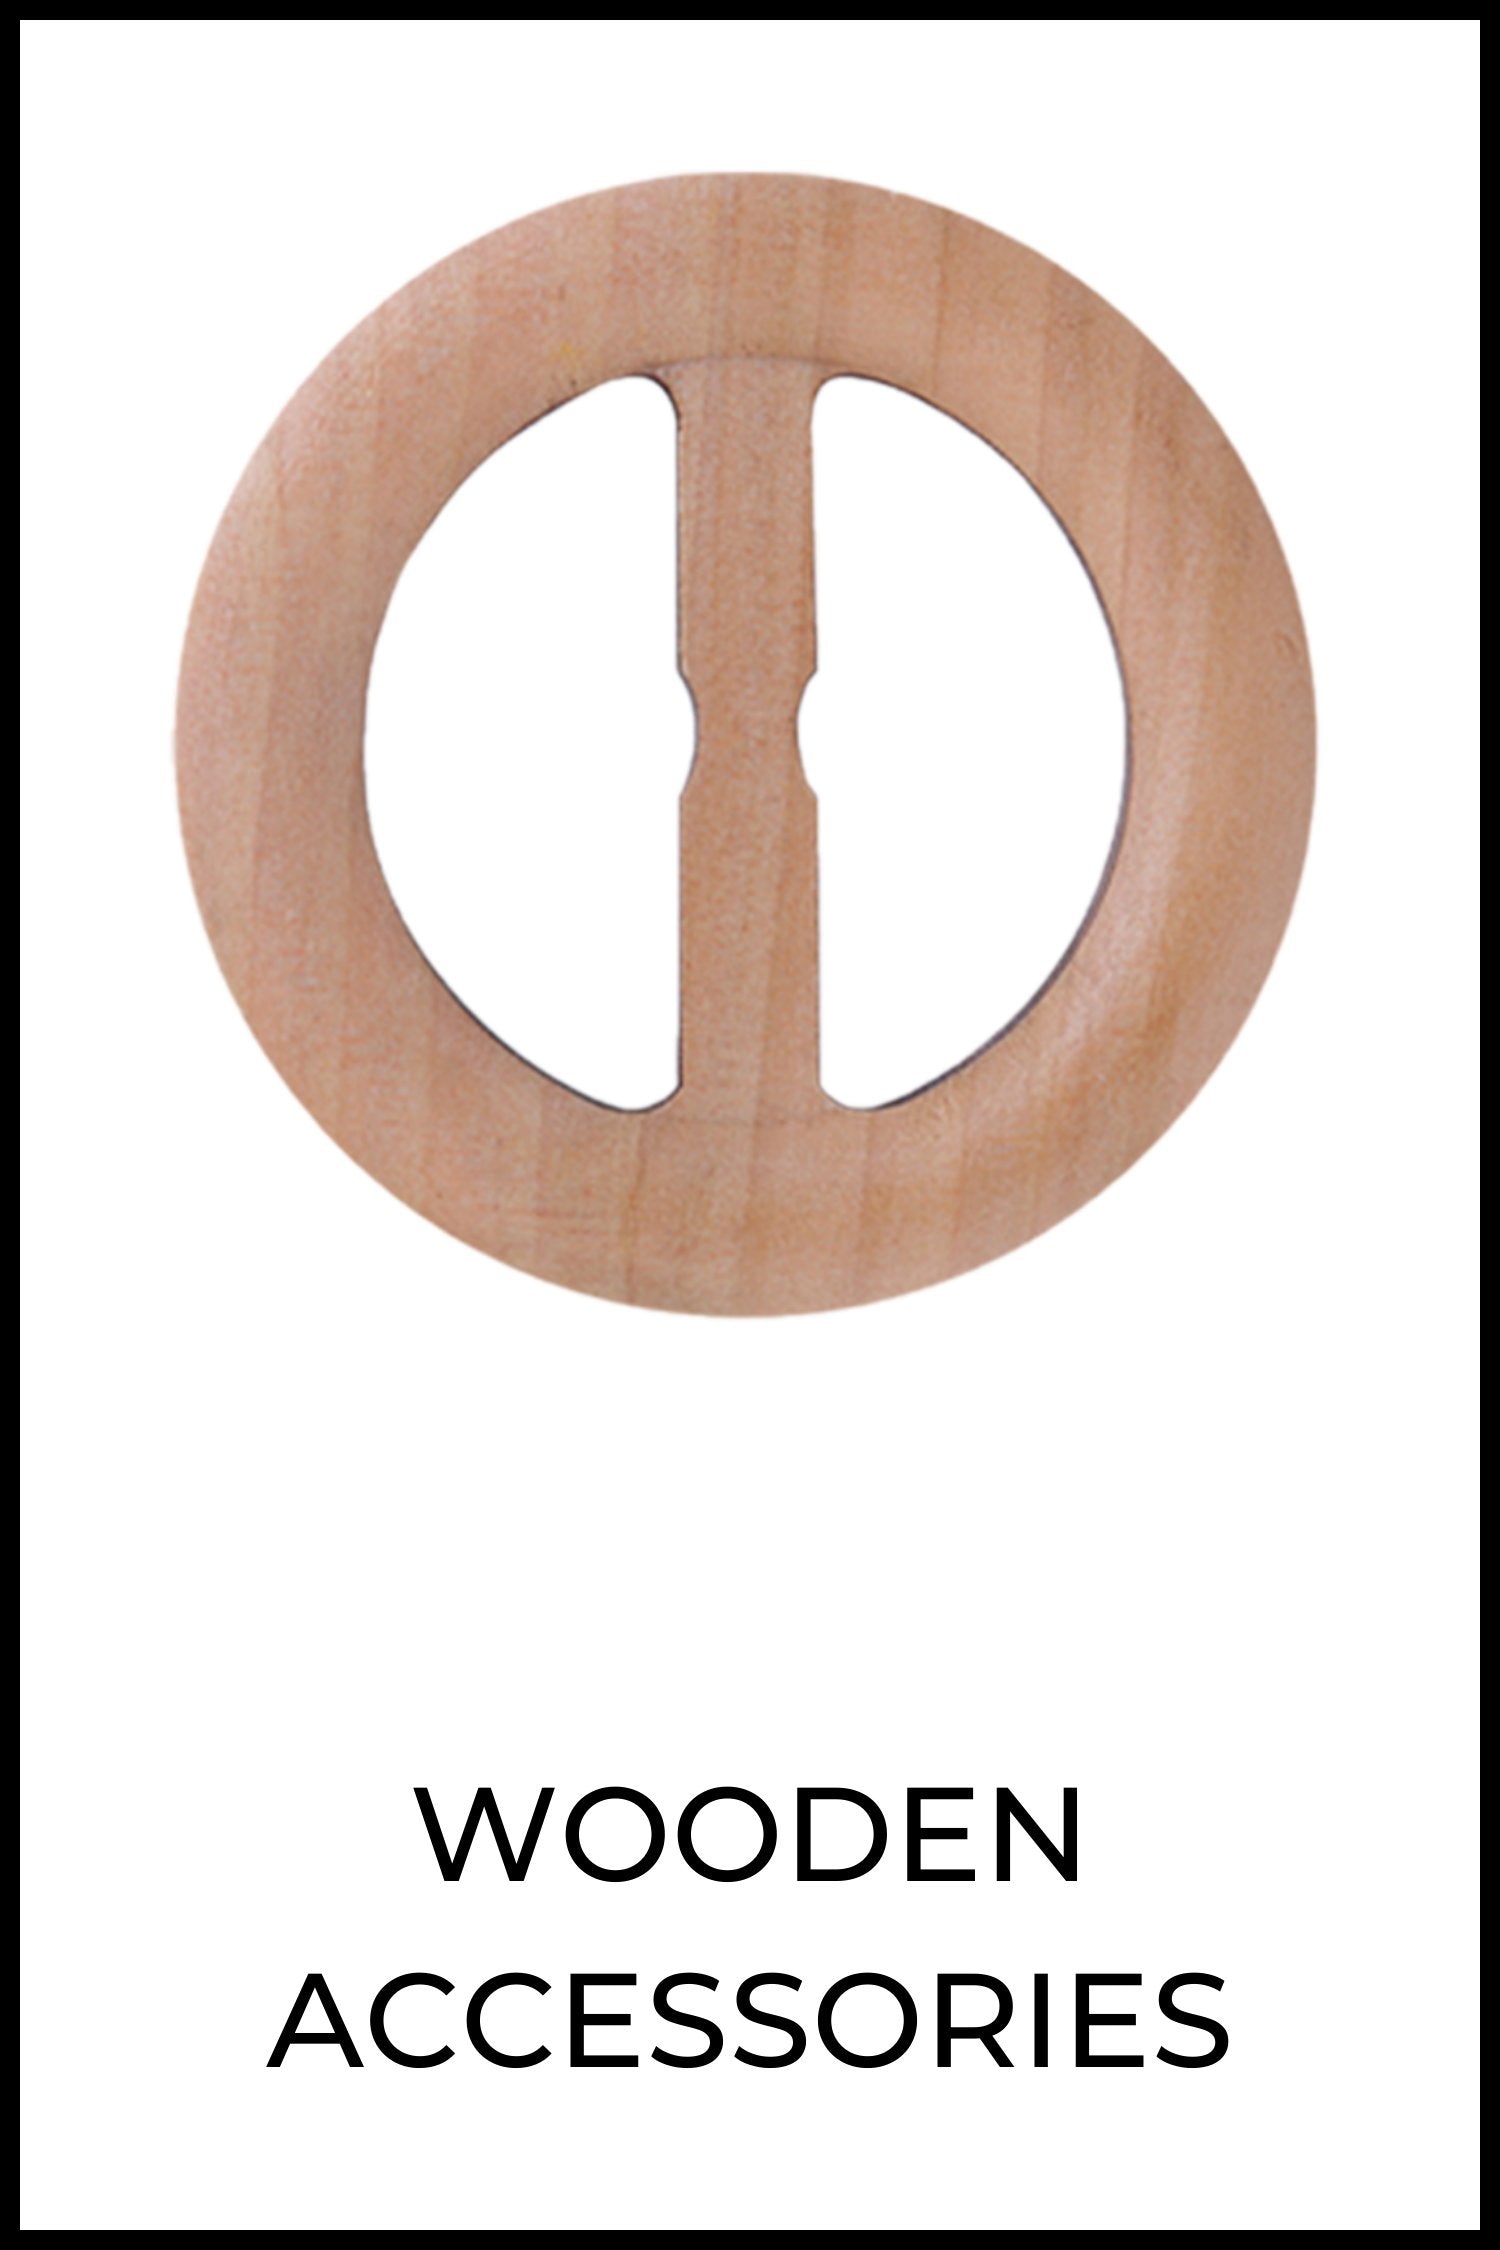 Wooden Accessories - buy wooden buttons, buckles and much more for designer clothing online at Jhonea Accessories.